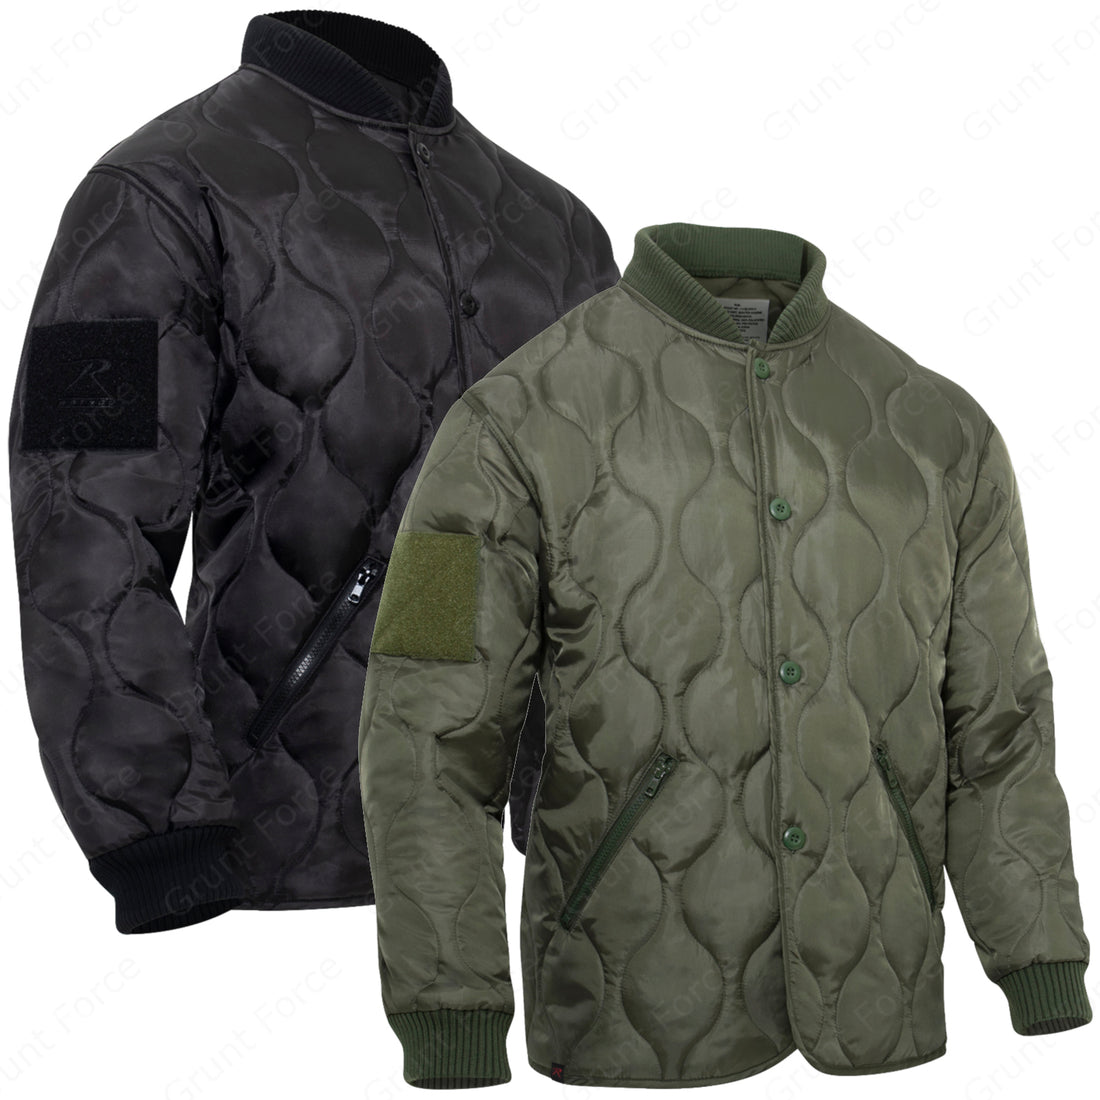 Rothco's Quilted Woobie Jacket